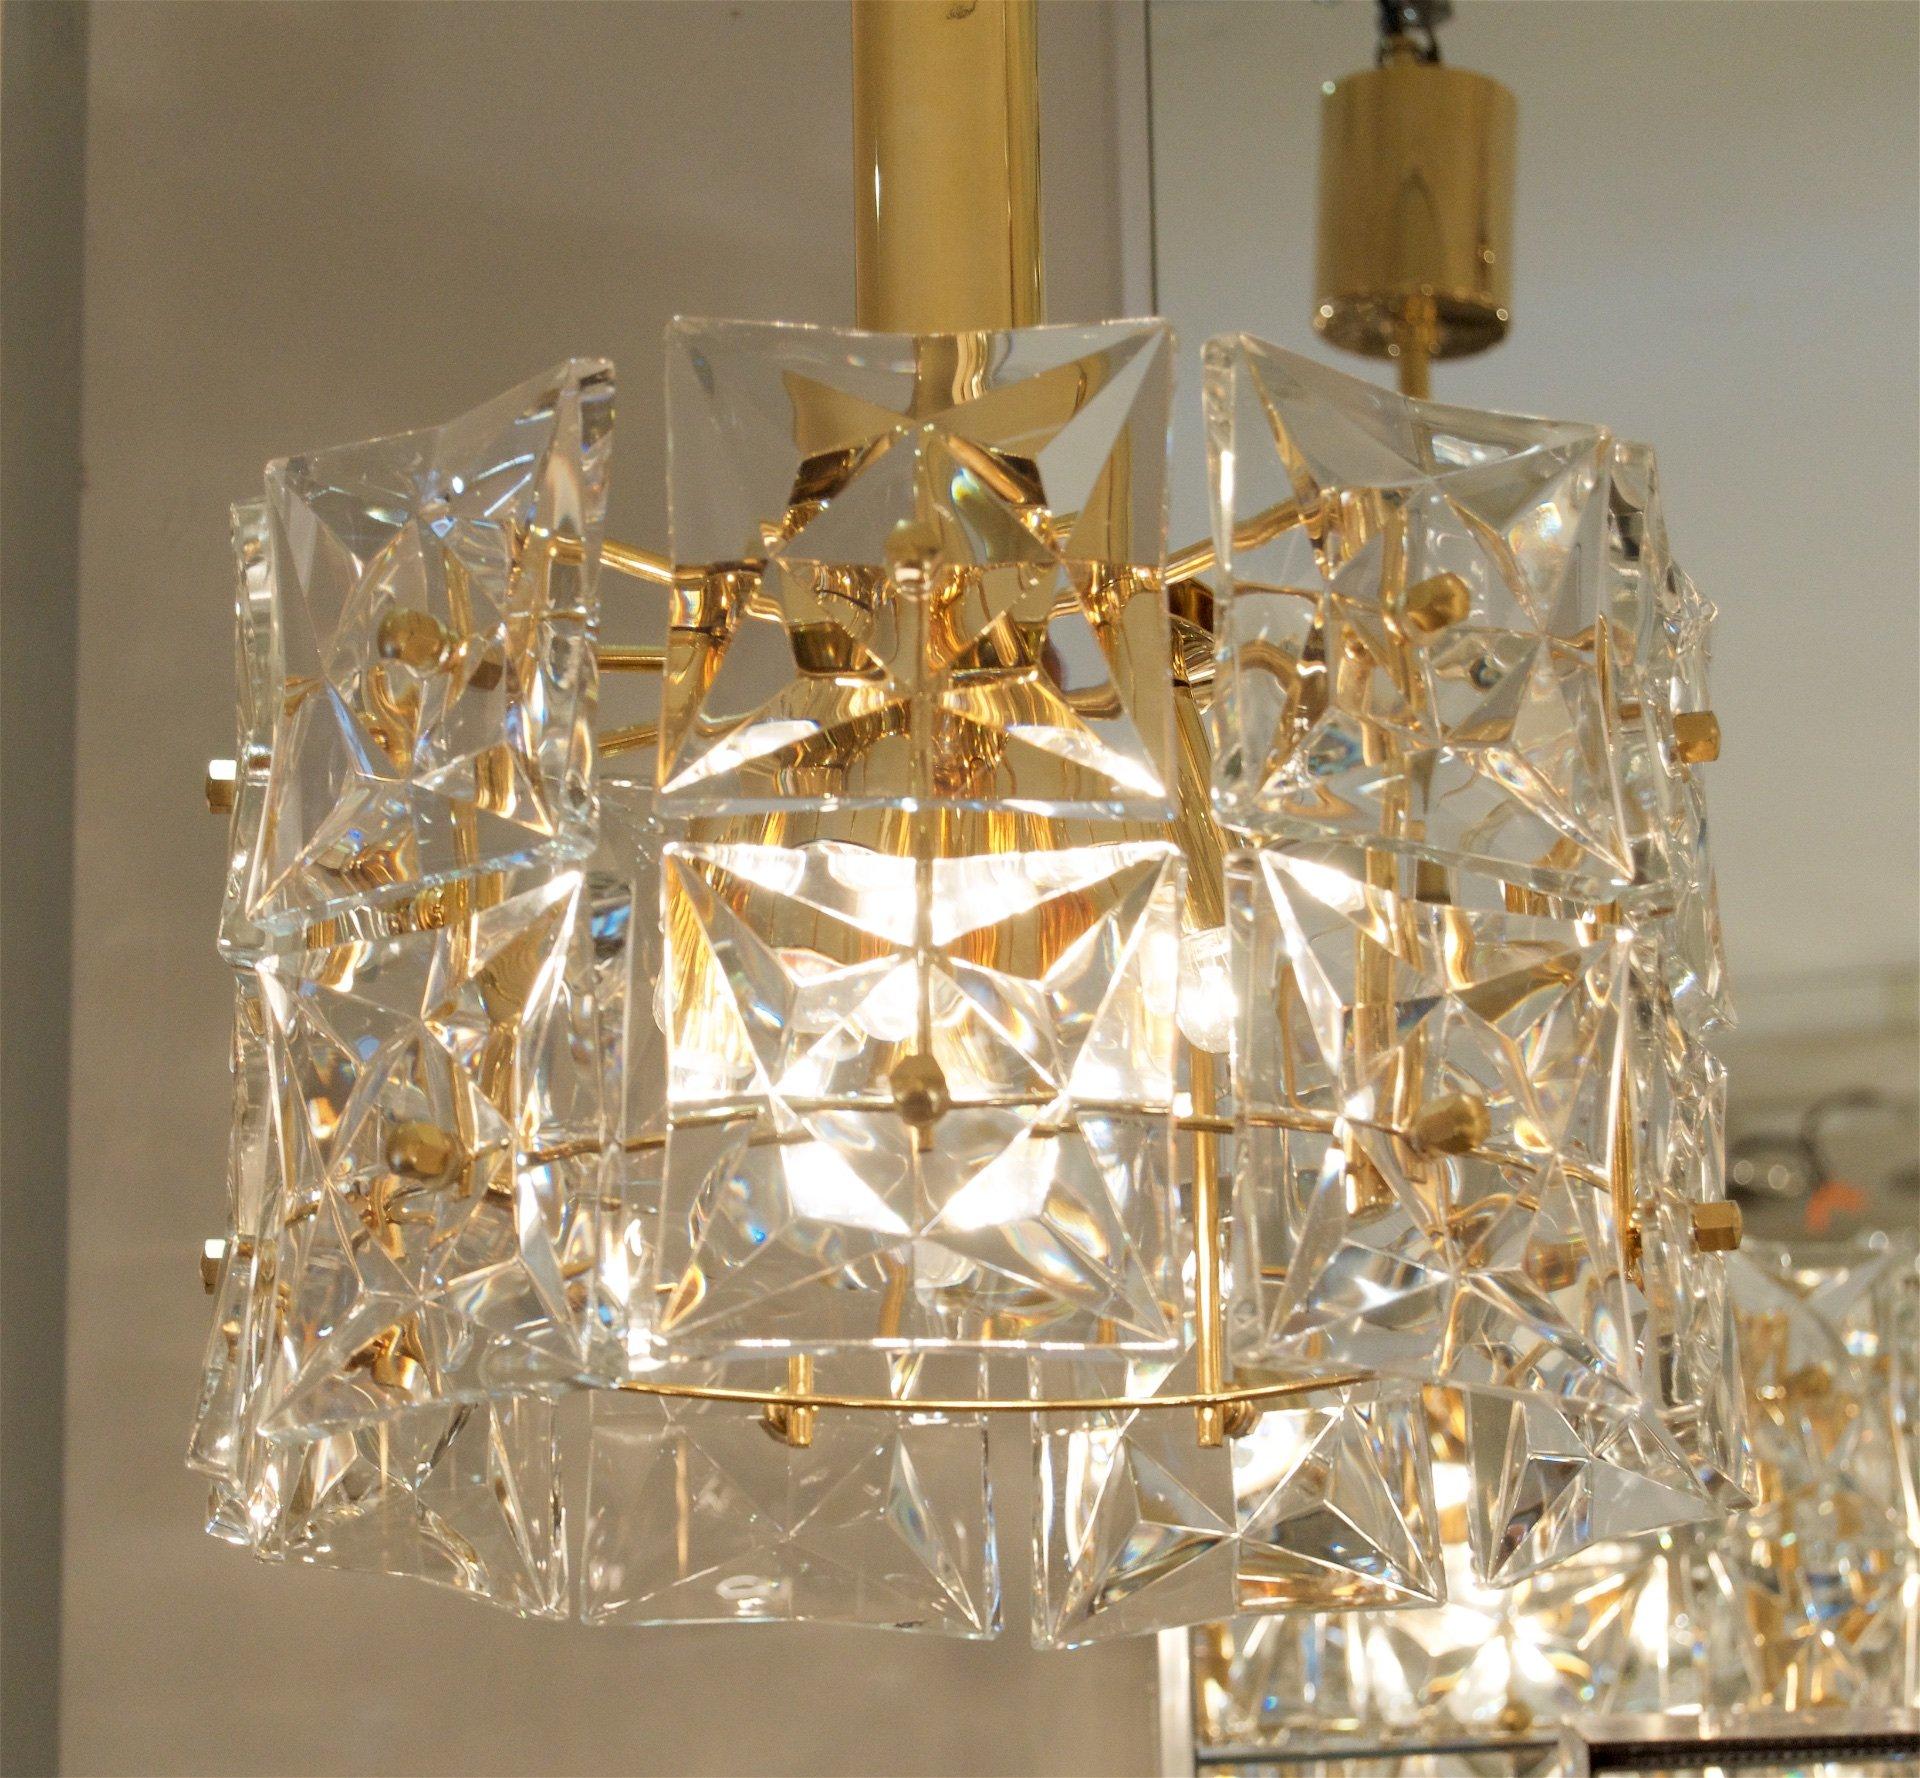 German Two-Tier Goldplate Drum-Form Chandelier with Square Crystals by Kinkeldey For Sale